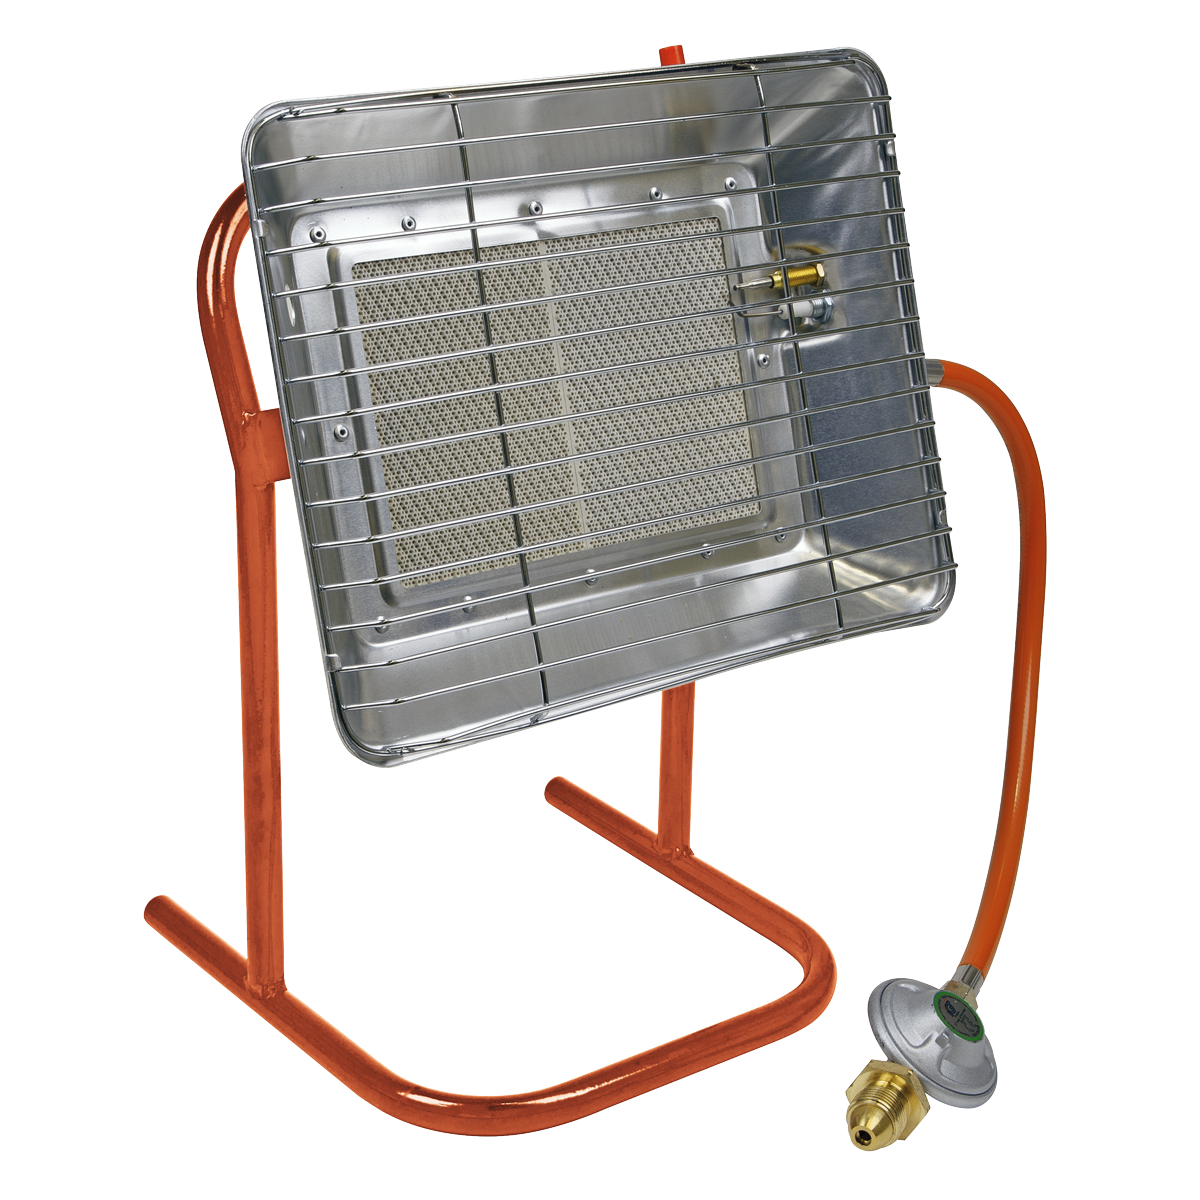 Sealey Space Warmer® Propane Heater with Stand 14,330Btu/hr